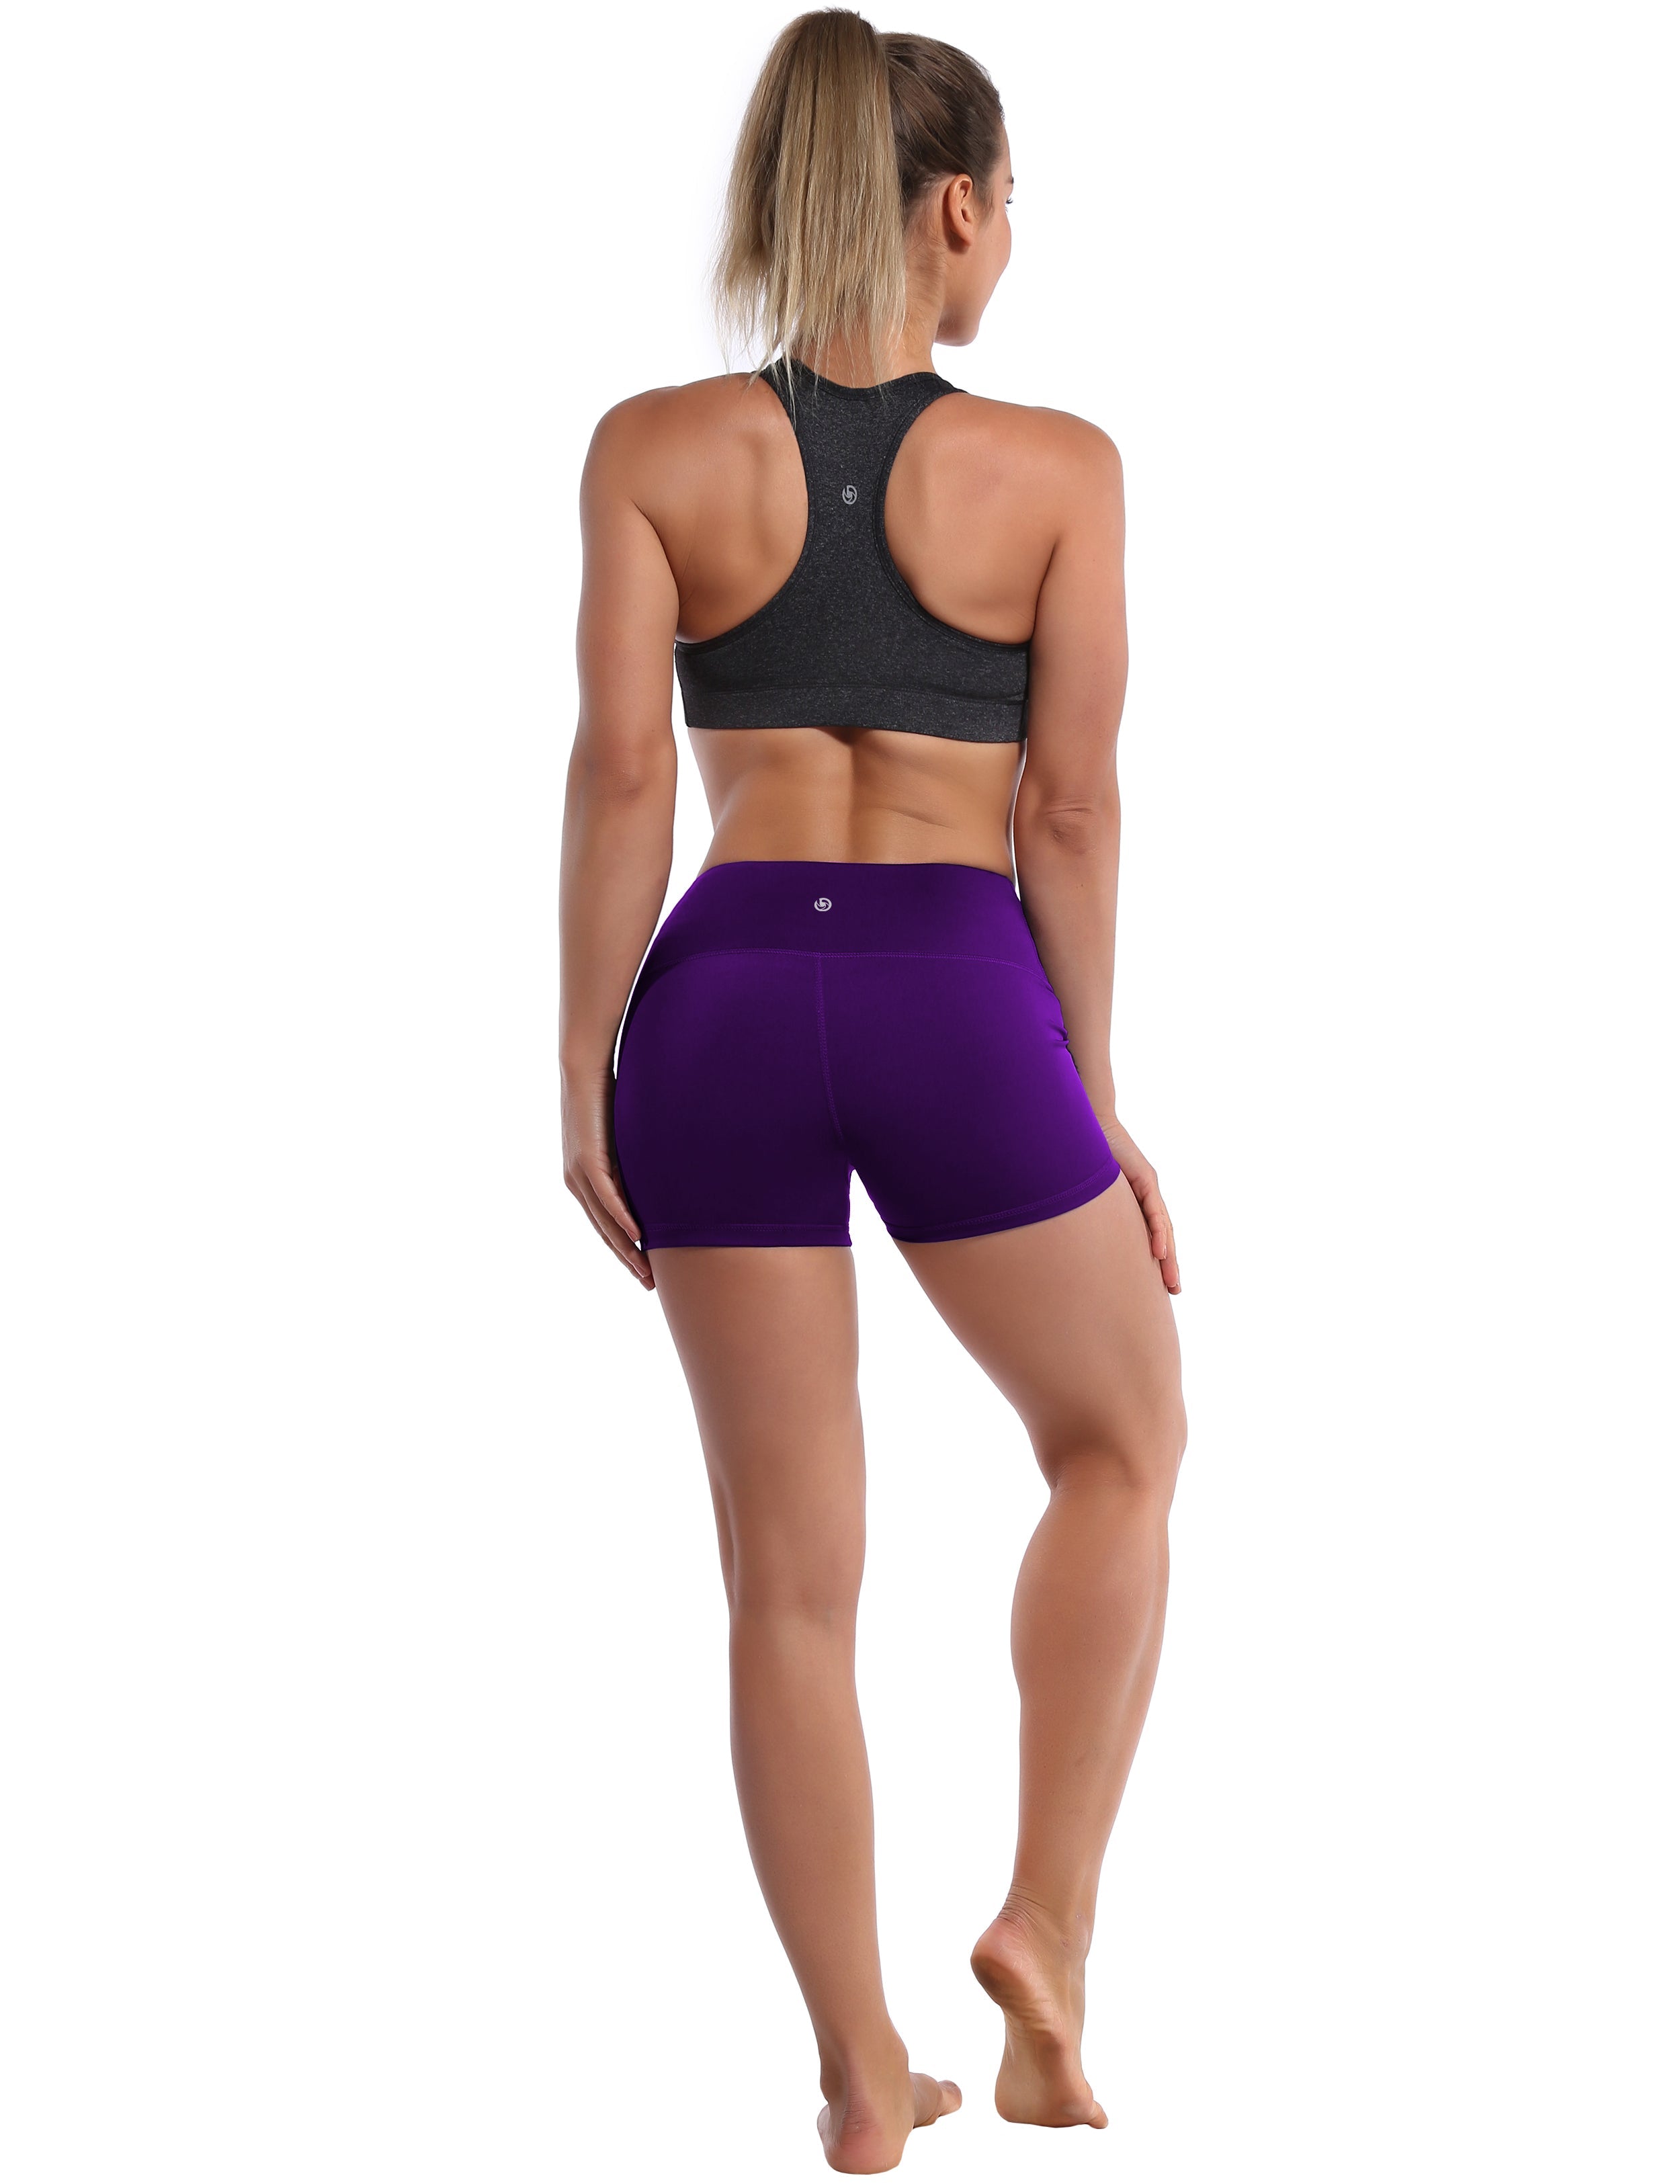 2.5" Jogging Shorts eggplantpurple Softest-ever fabric High elasticity High density 4-way stretch Fabric doesn't attract lint easily No see-through Moisture-wicking Machine wash 75% Nylon, 25% Spandex